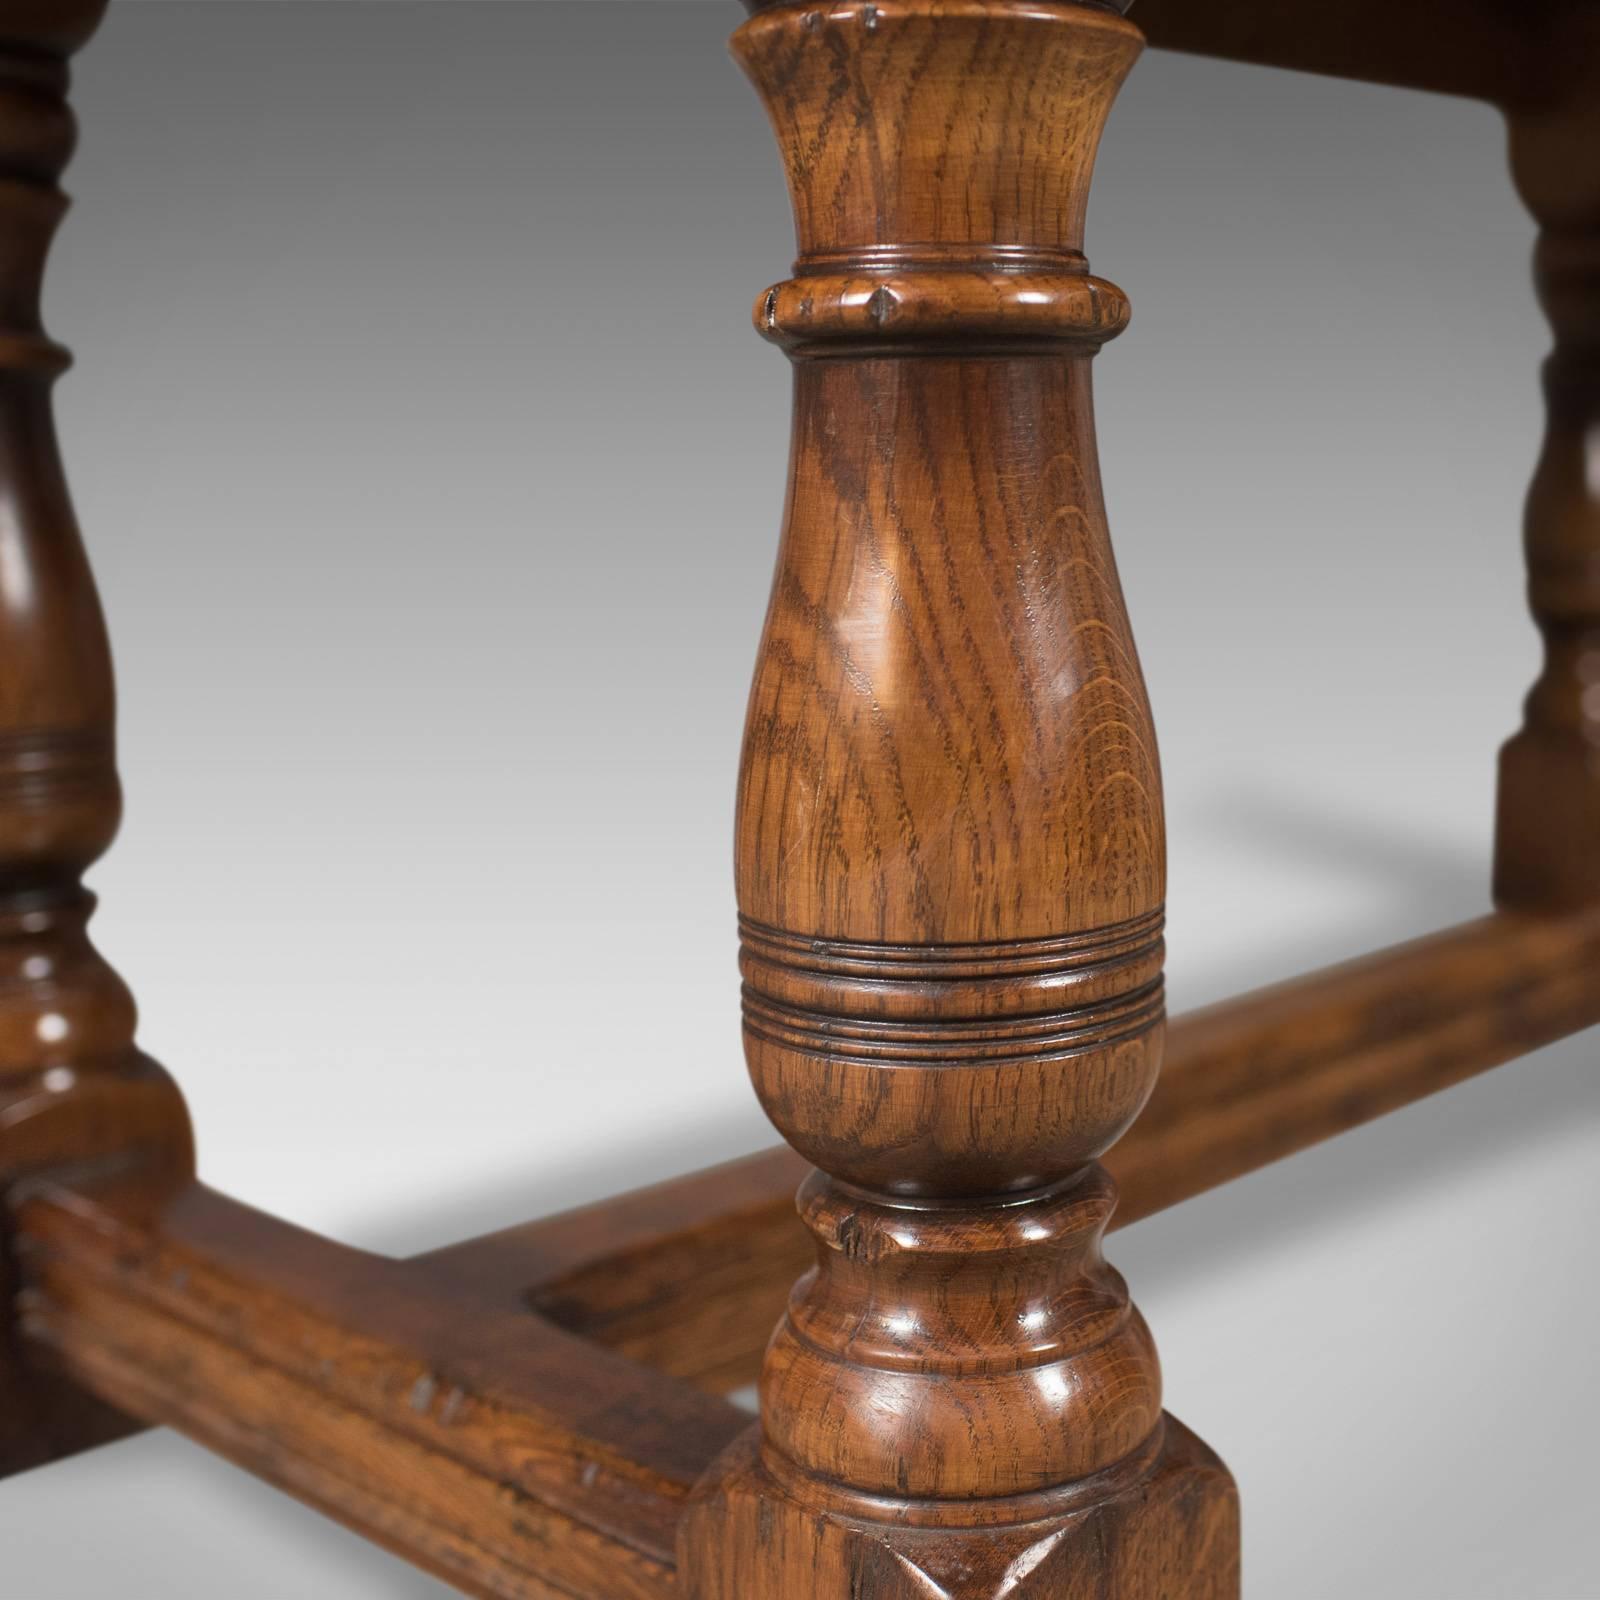 Six-Eight-Seat Oak Refectory Table, 17th Century Revival, Late 20th Century 3